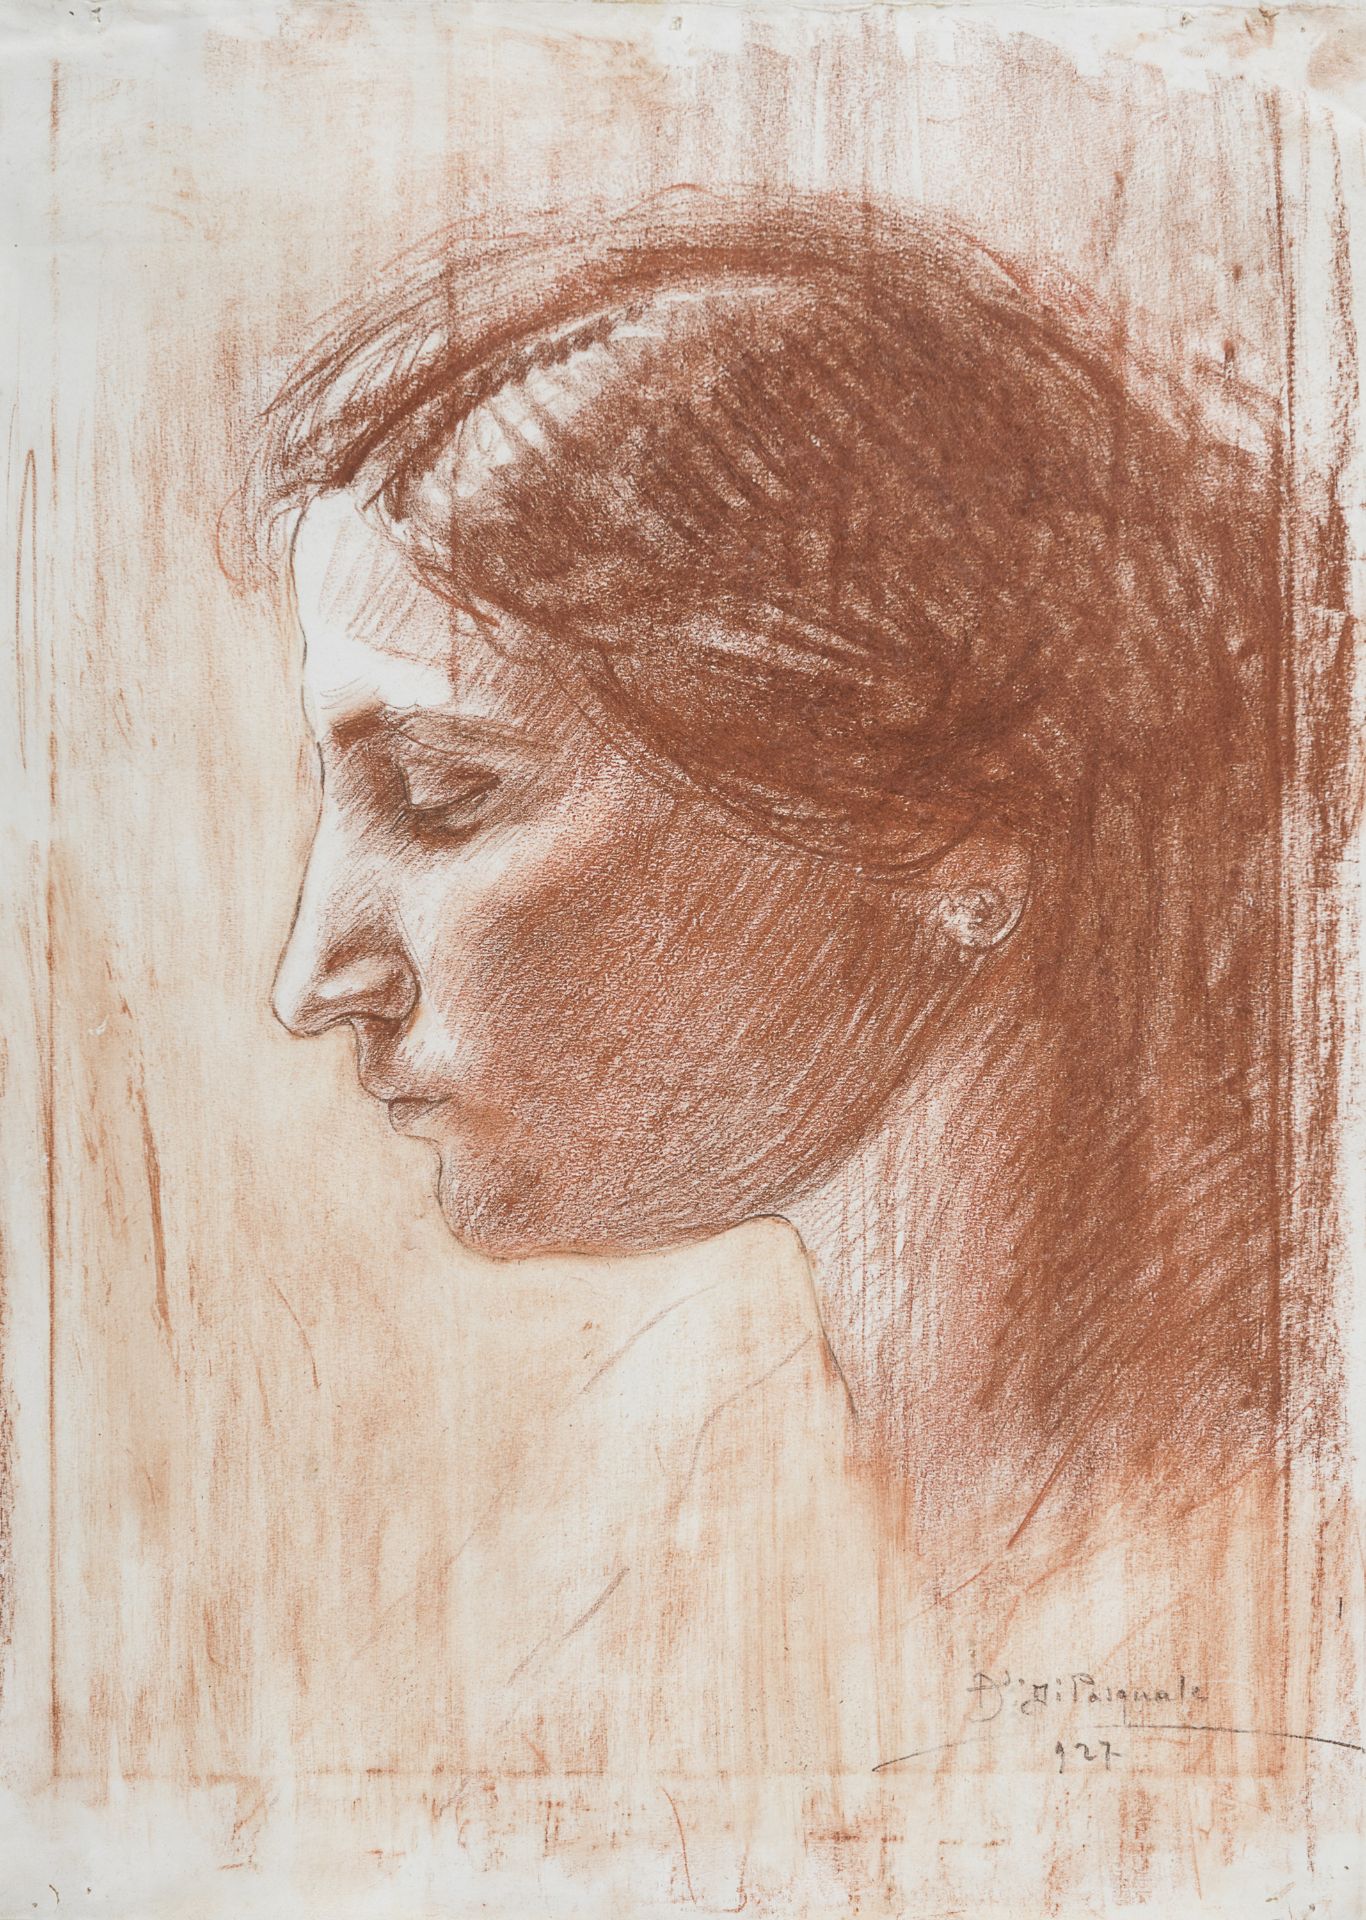 SANGUINE DRAWING BY ALFONSO DI PASQUALE